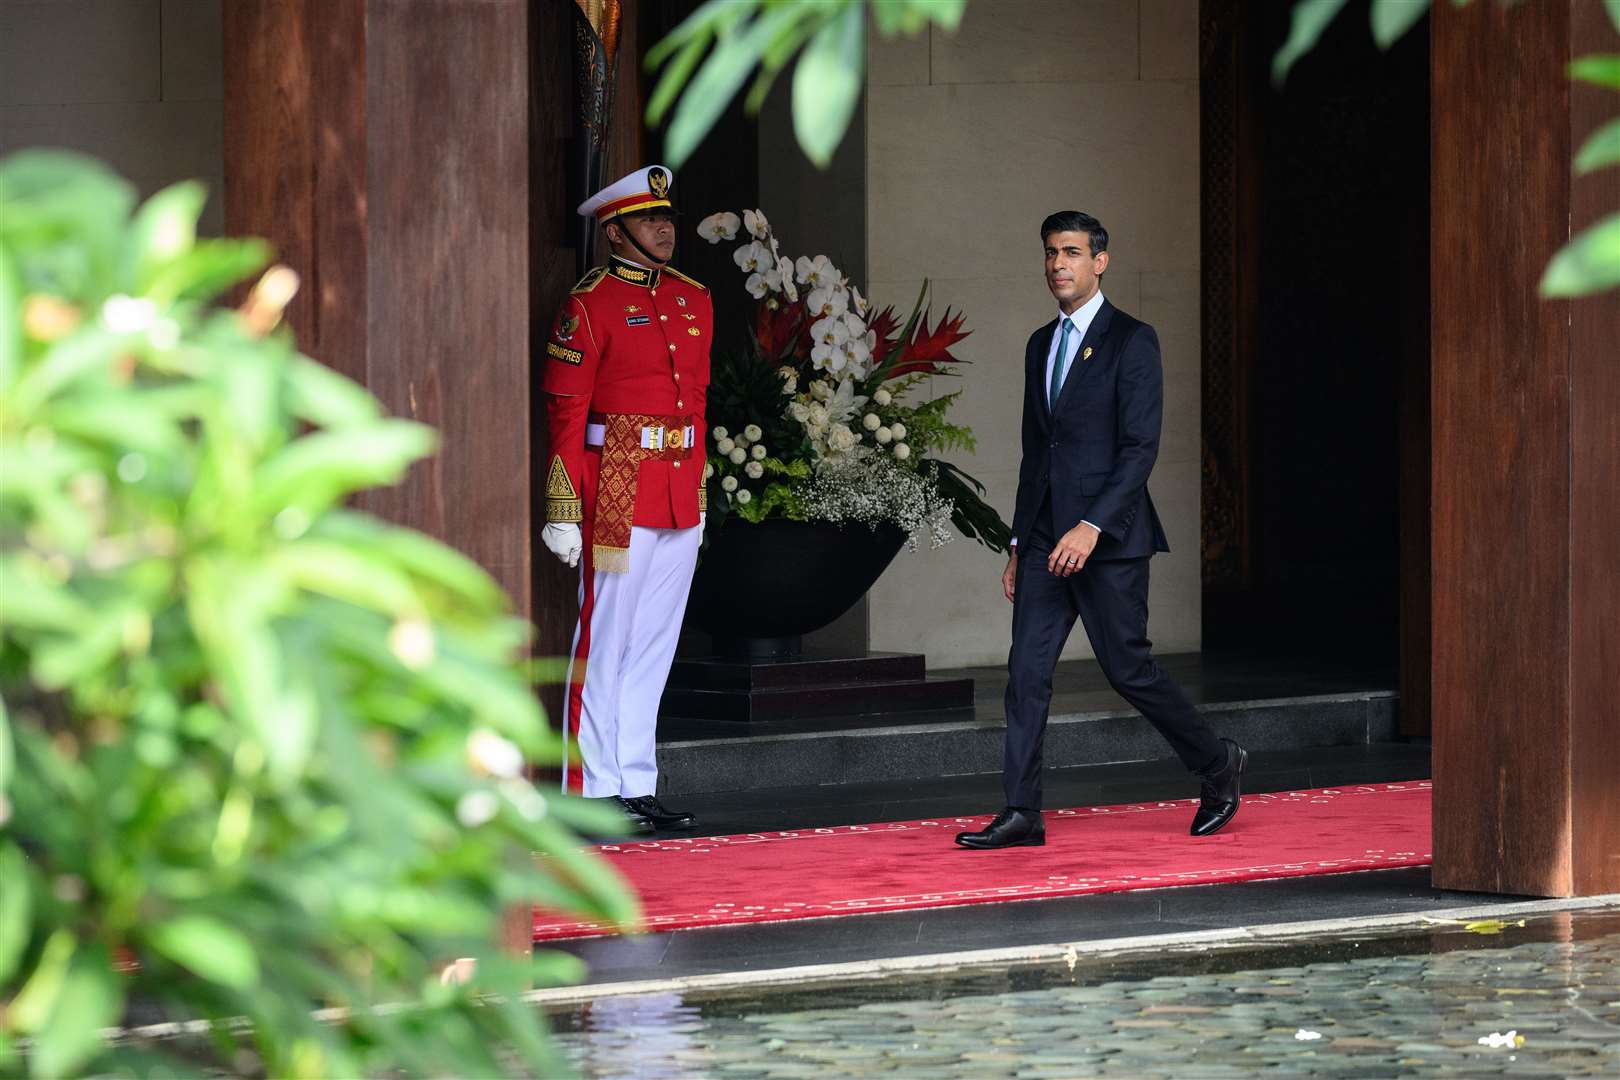 Prime Minister Rishi Sunak arrives at the Apurva Kempinski hotel ahead of the formal welcome ceremony (Leon Neal/PA)